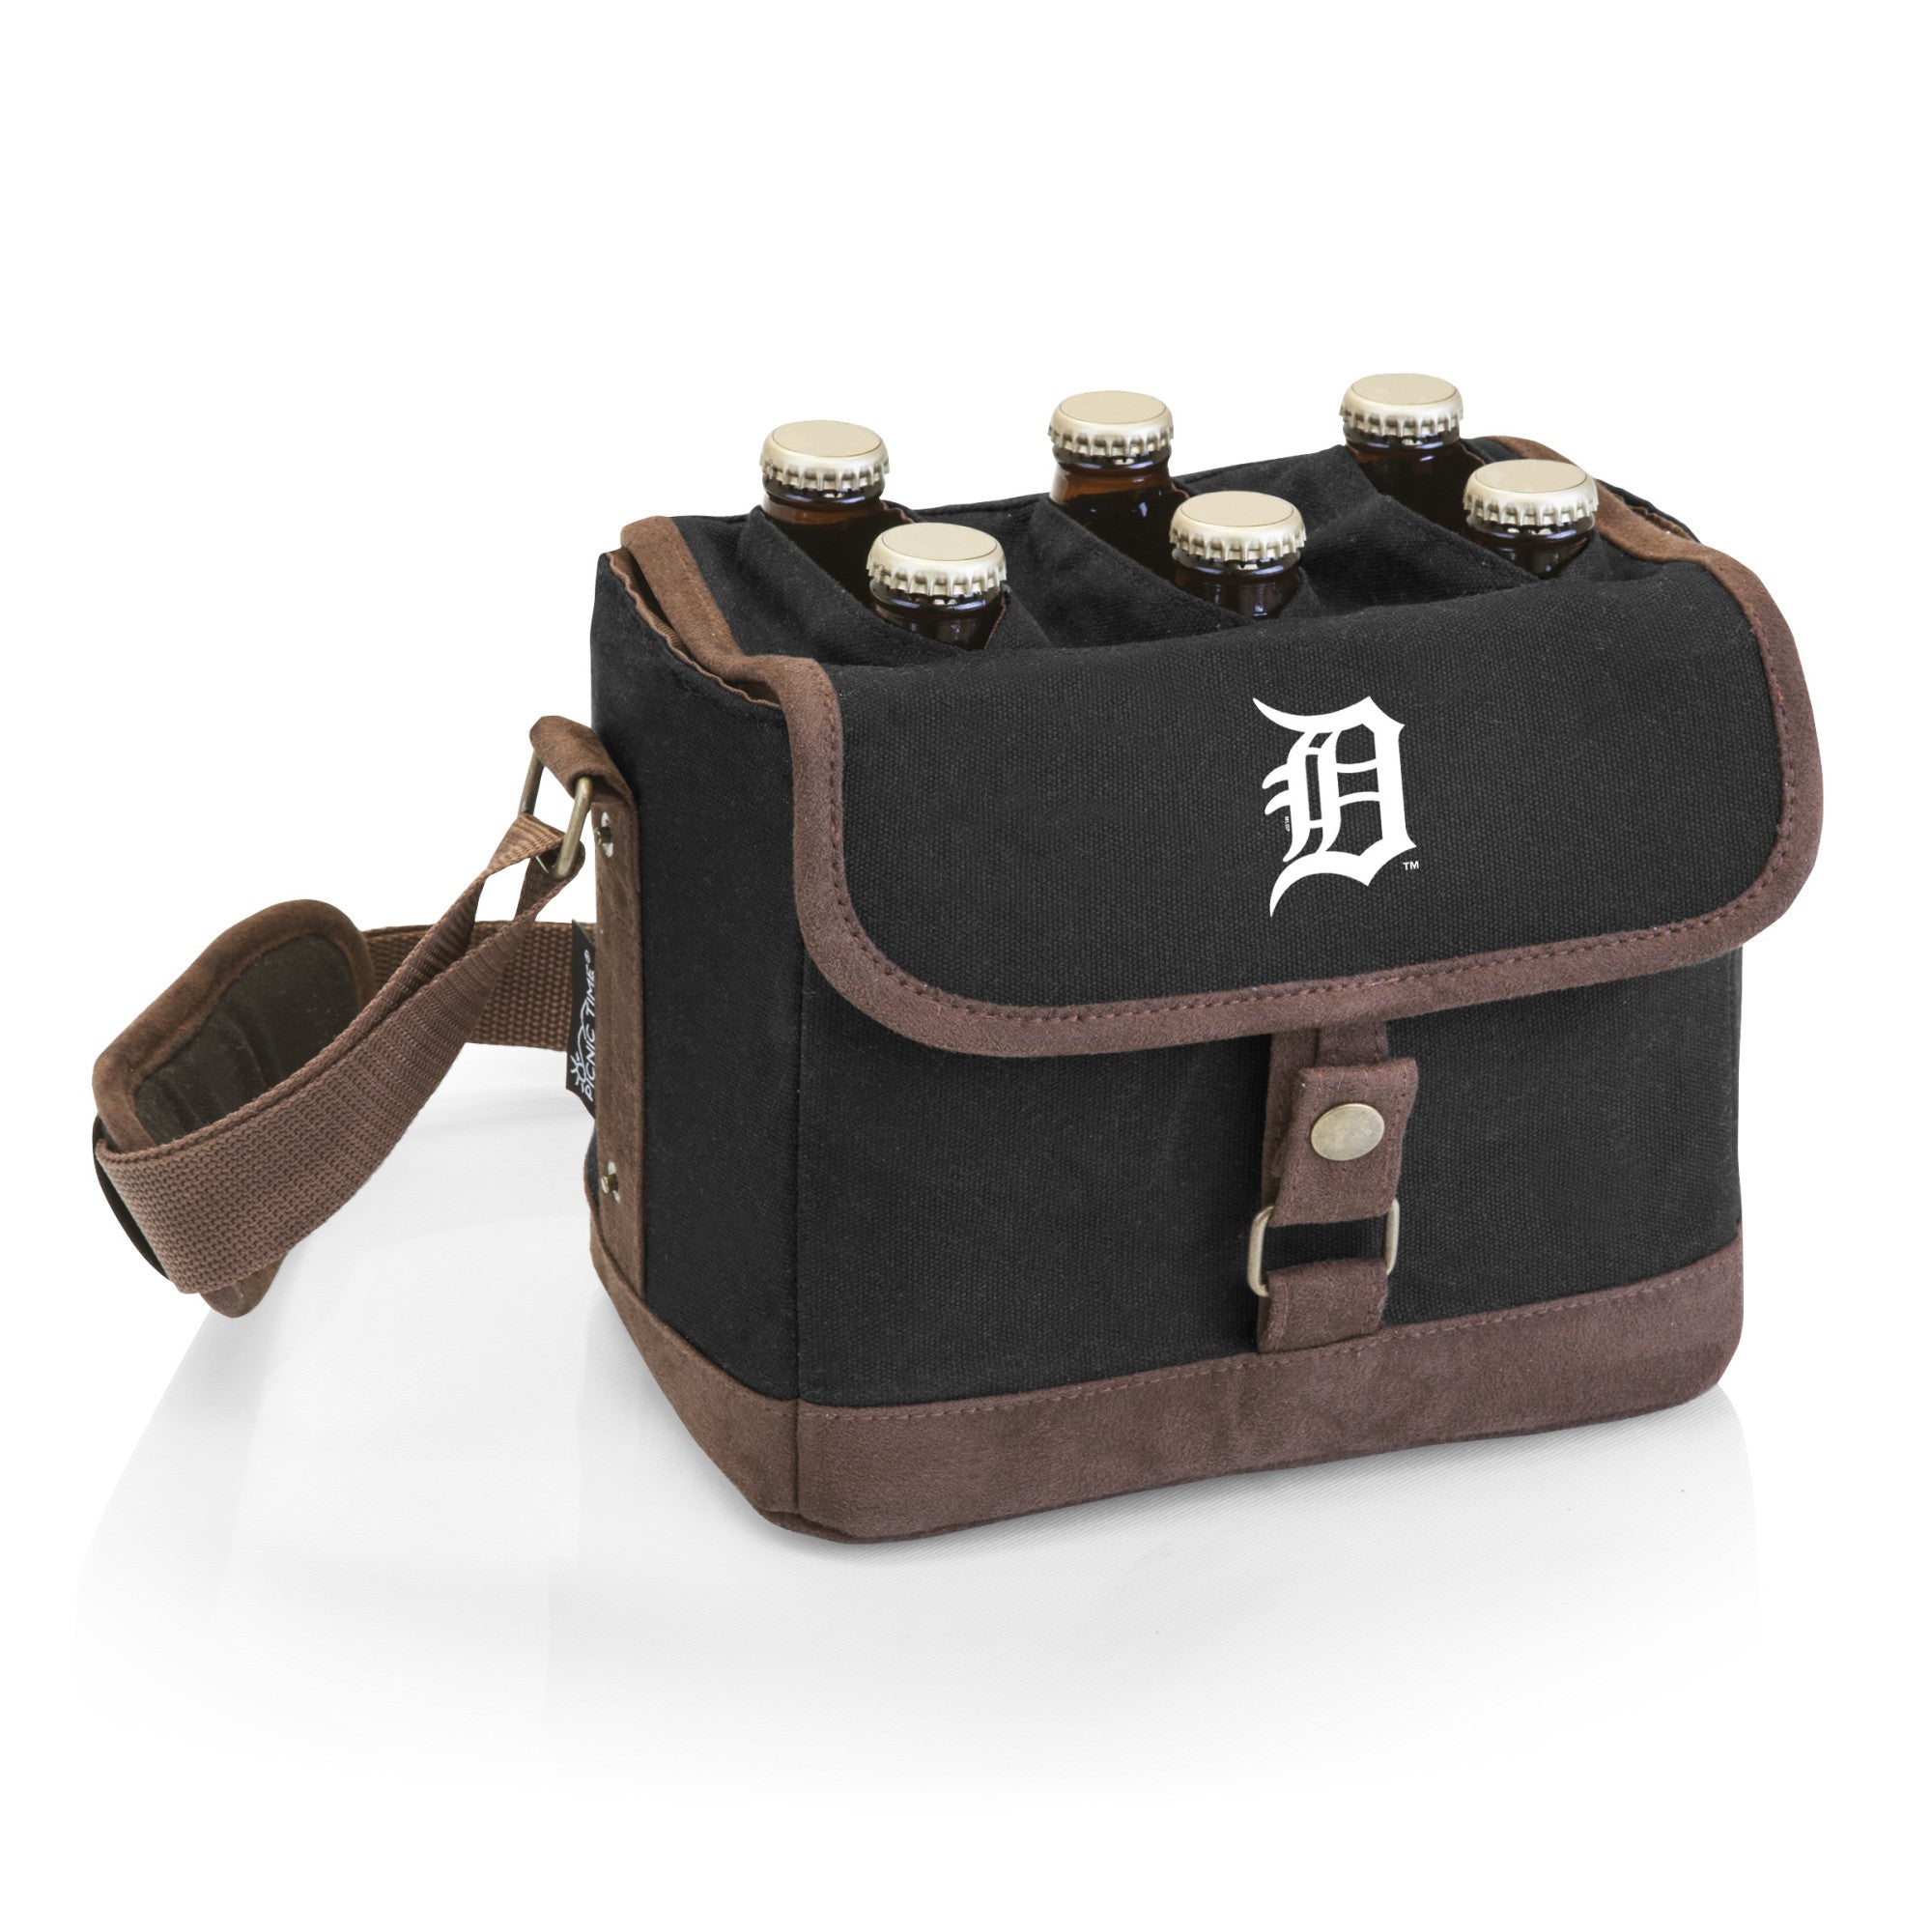 Detroit Tigers - Beer Caddy Cooler Tote with Opener